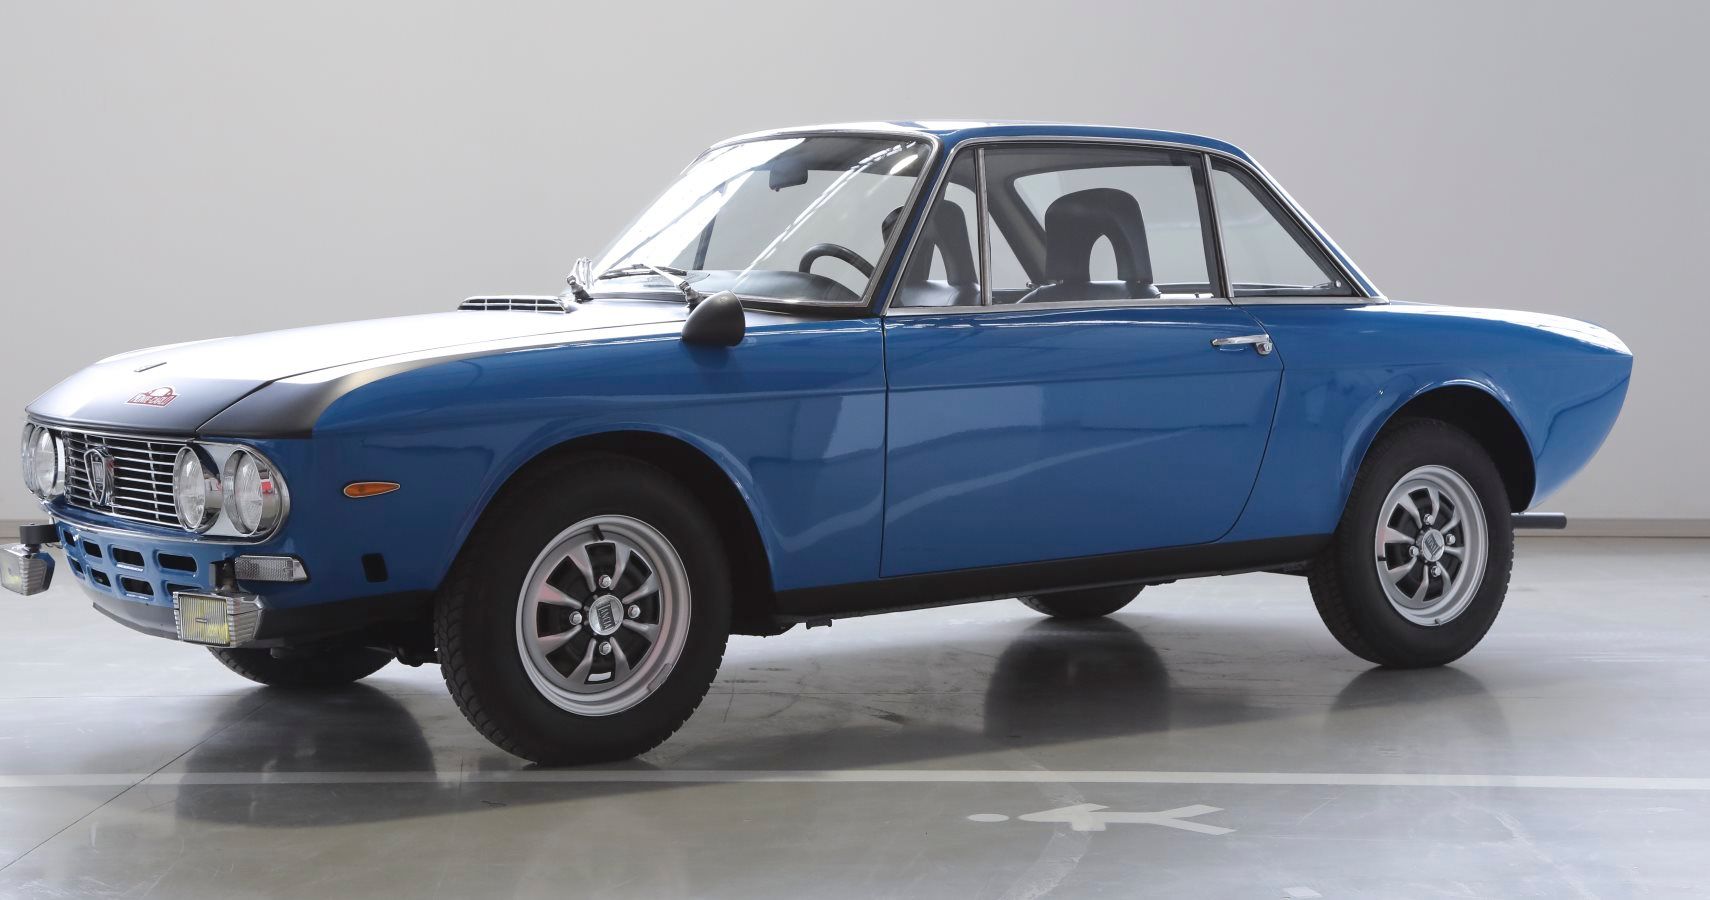 Fiat Chrysler Automobiles Want To Buy & Restore Classic Alfa Romeros, & Other Reto Cars